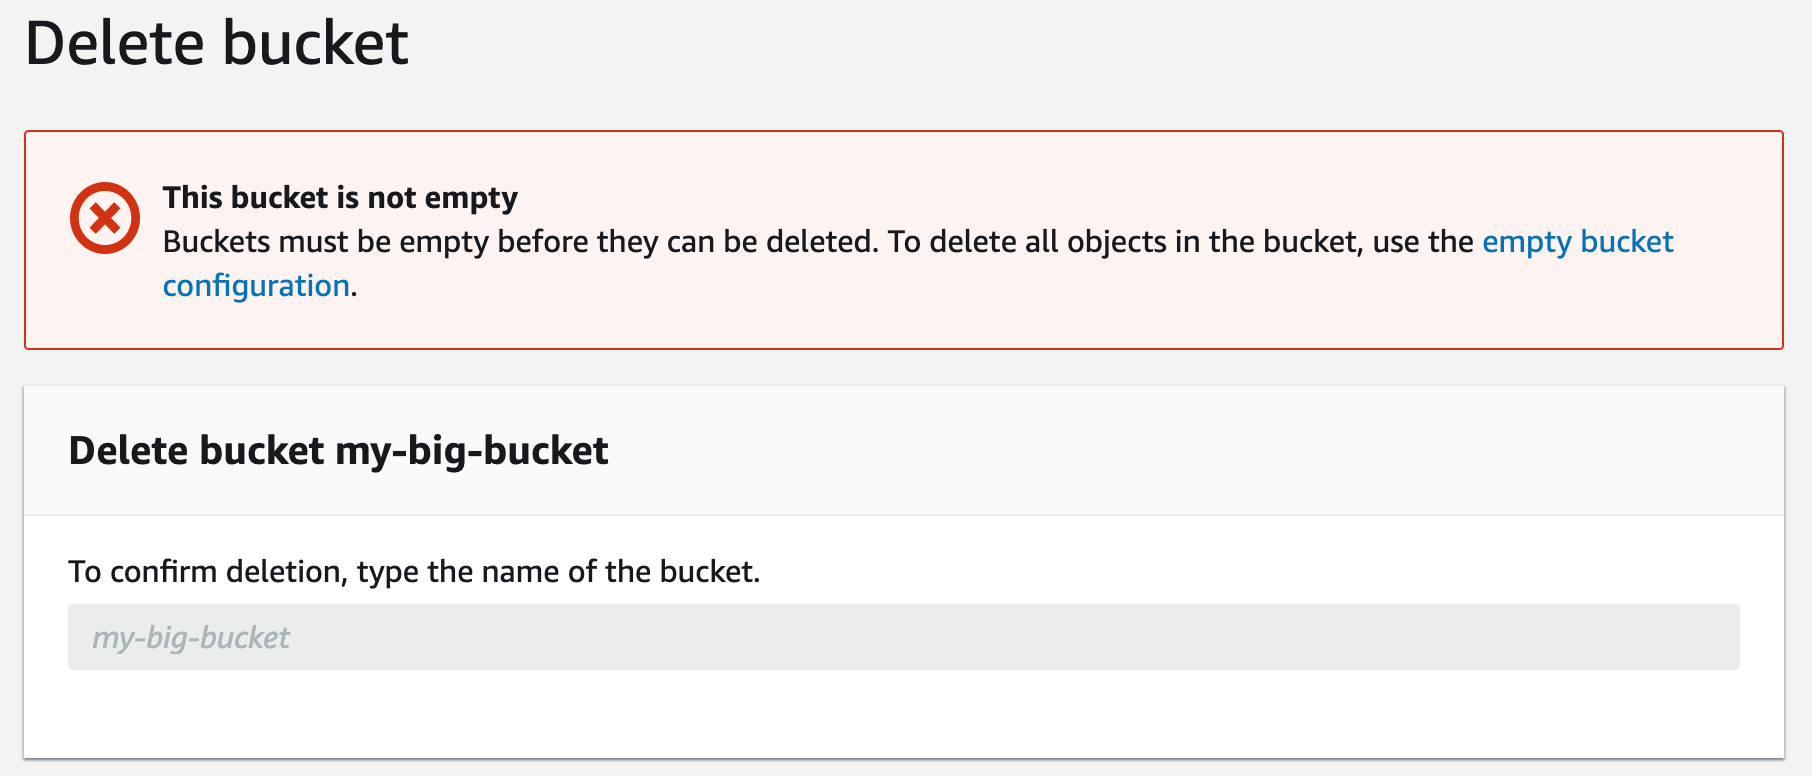 Nope, you can't just delete a non-empty S3 bucket